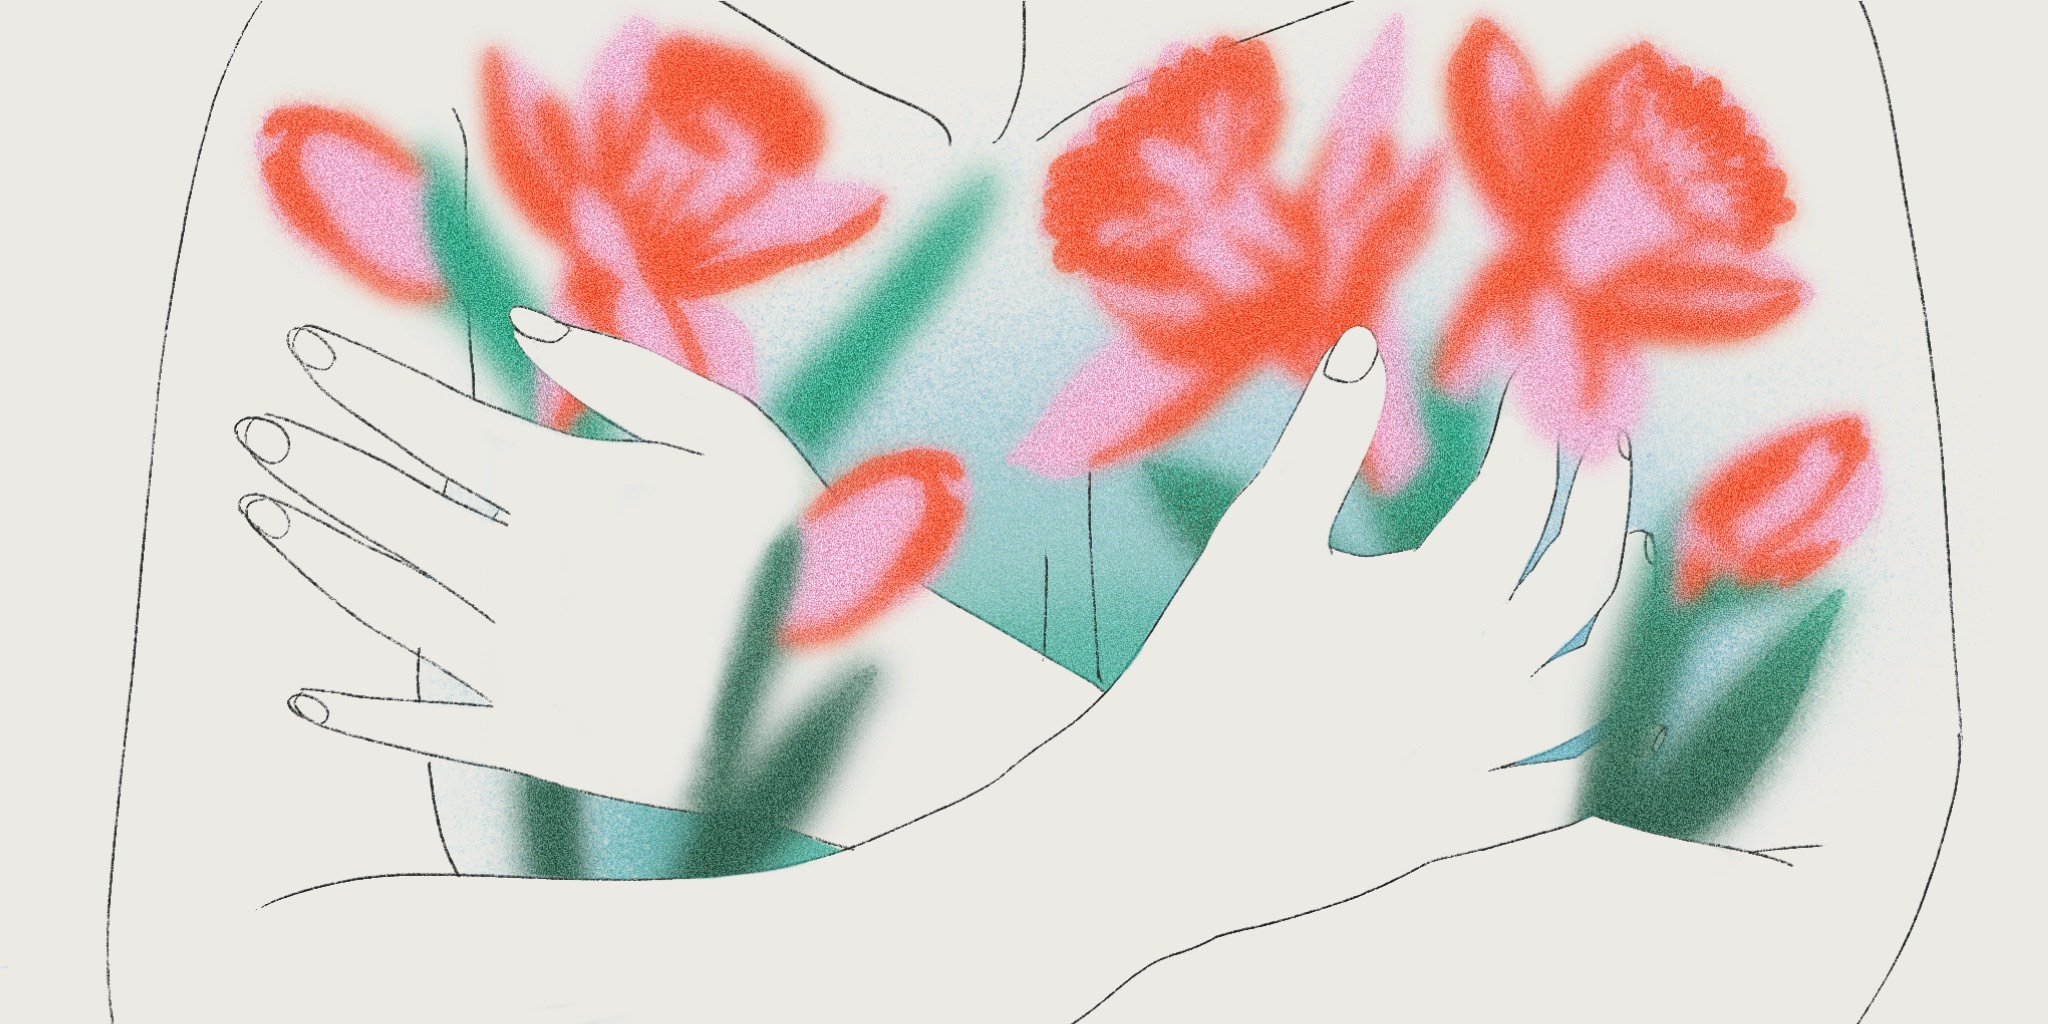 A line drawing of a woman's upper torso. Her arms are crossed in front of her, her hands covering her breasts. Underneath them, a pale blue-green aura is emanating from her chest, and pink and red flowers are blooming, further obscuring her breasts.